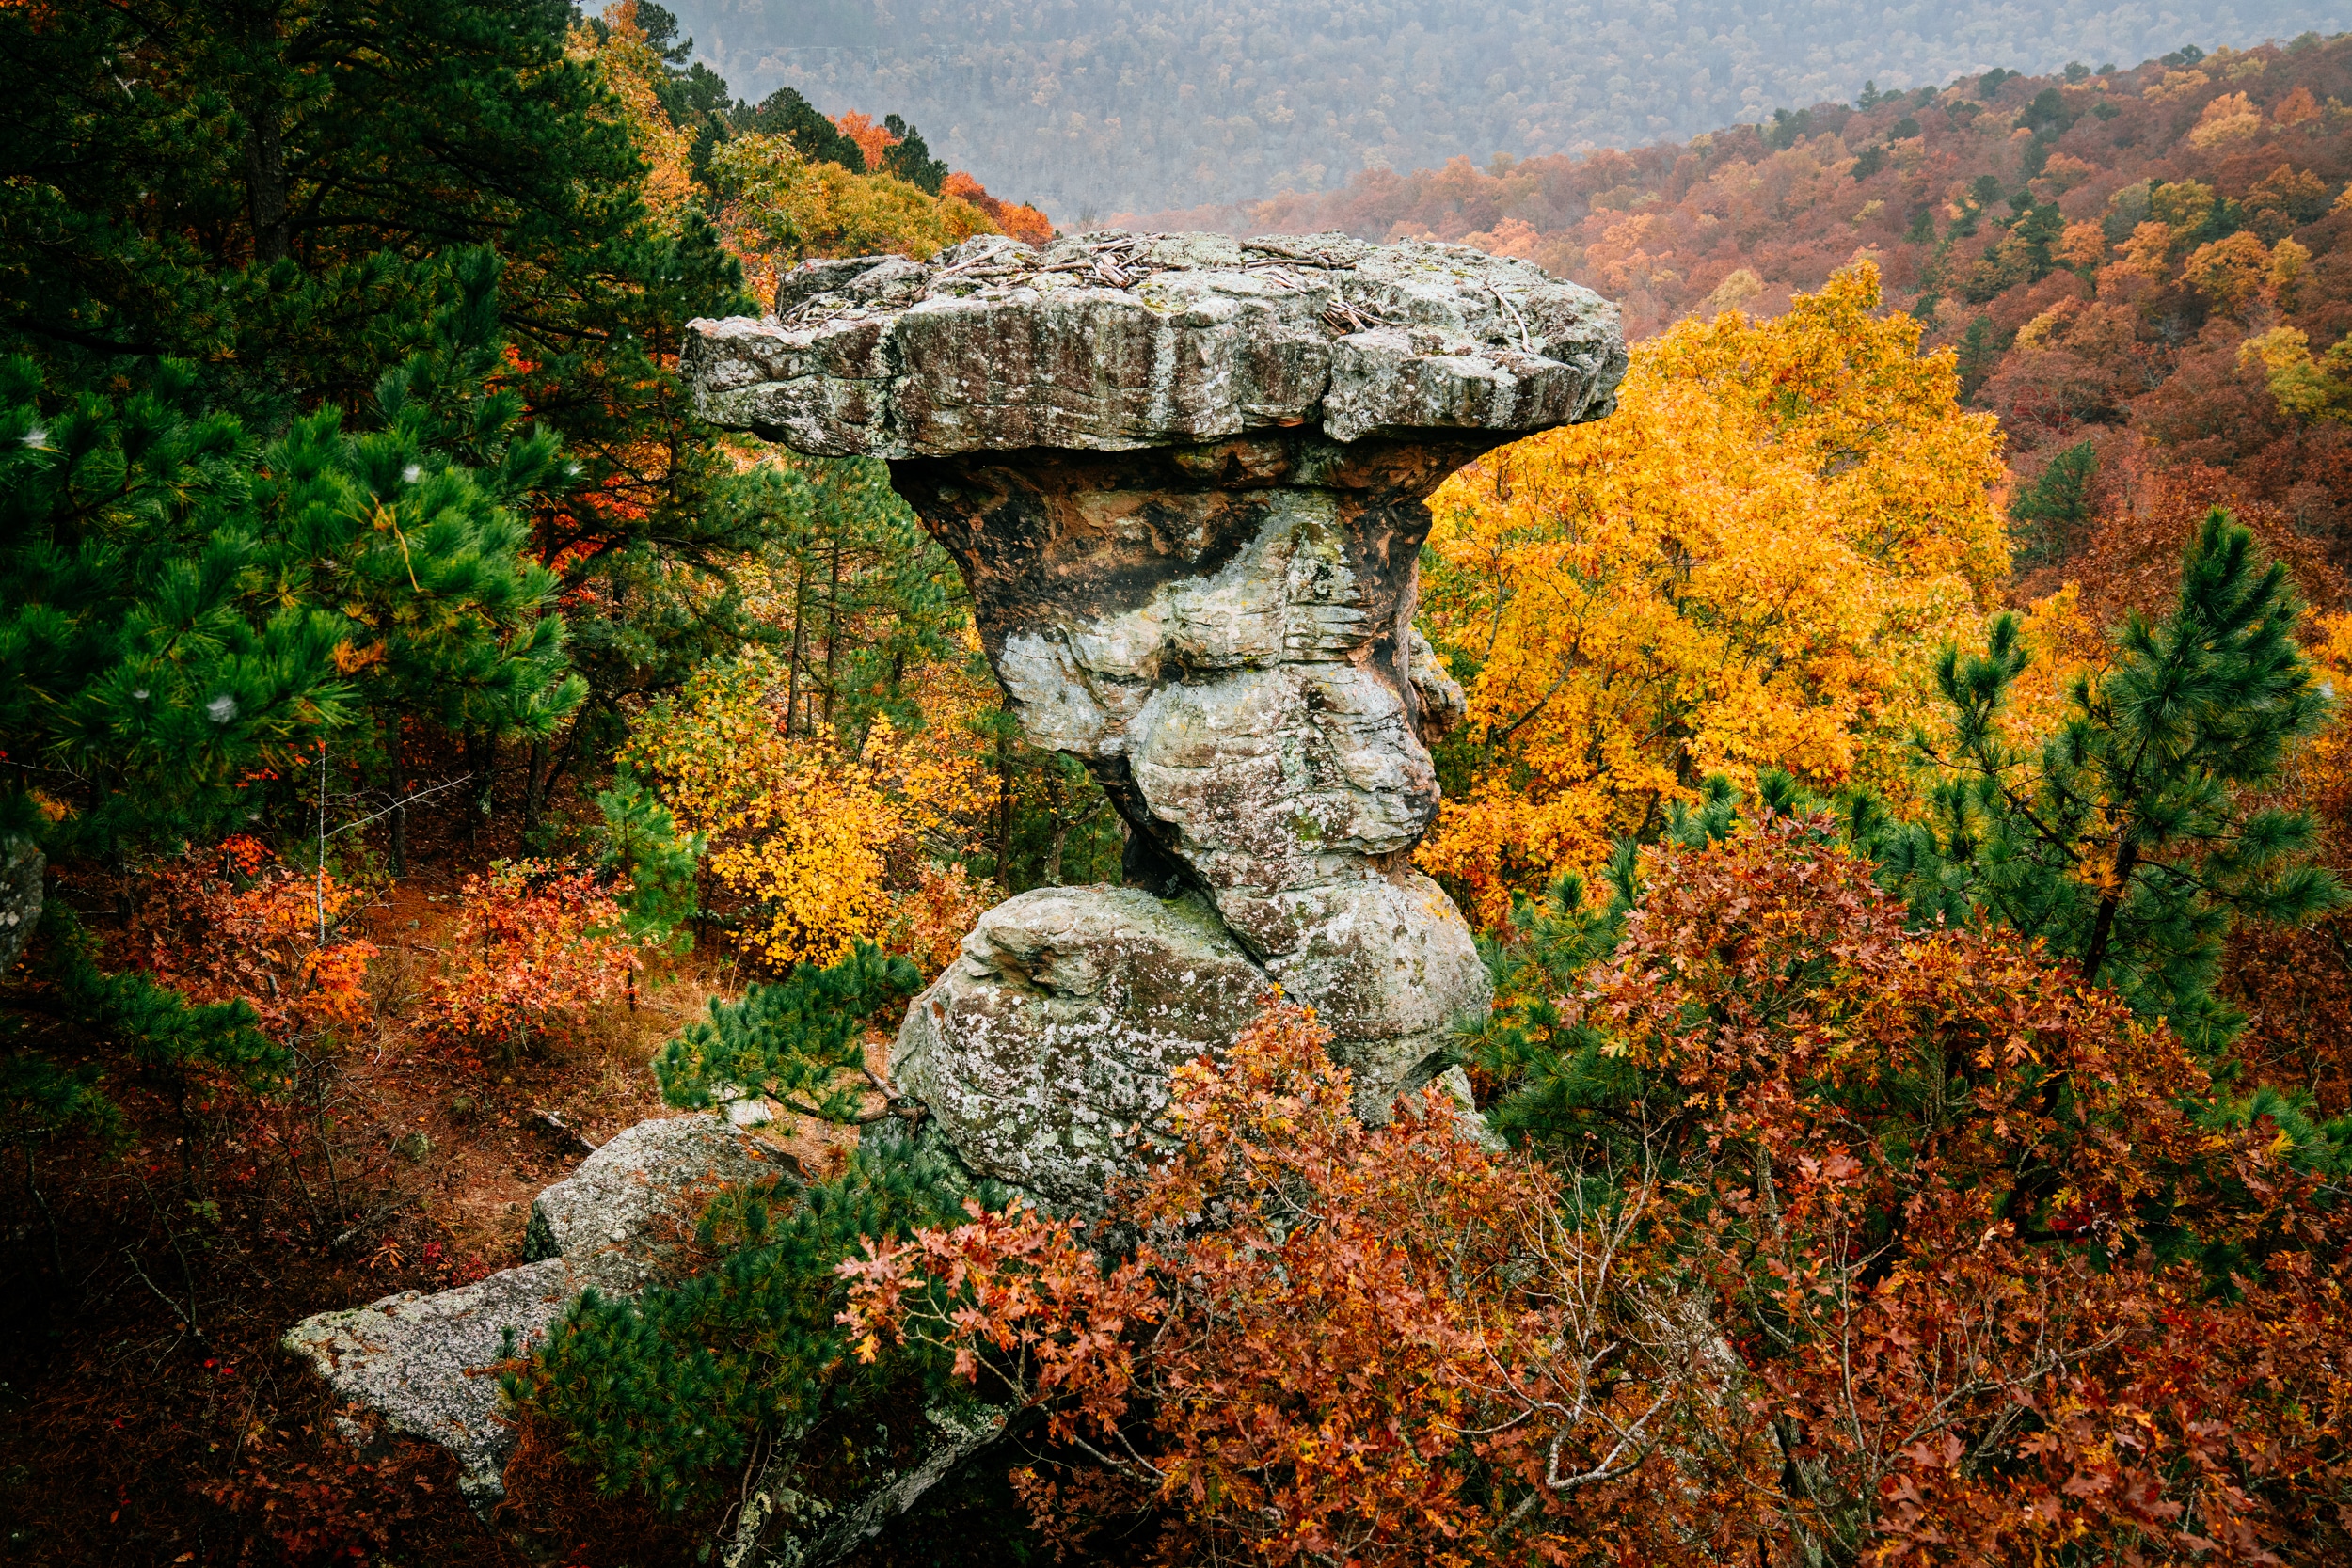 Autumn color on full display at Pedestal Rocks Scenic Area